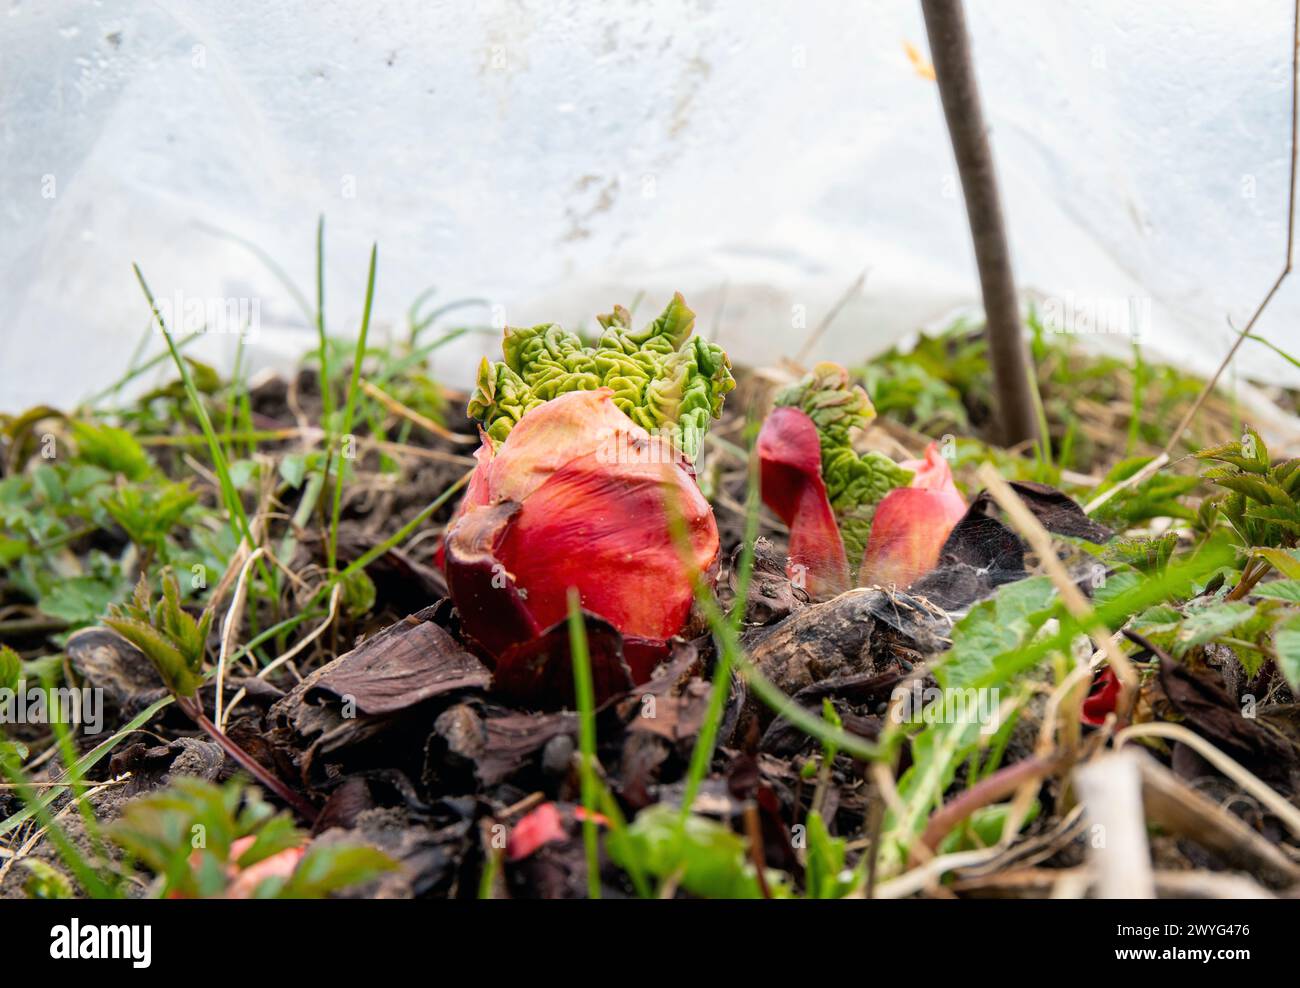 Young fresh rhubarb sprouts from the soil in spring outdoors in garden, covered with greenhouse plastic sheeting to speed up the growth with warmth. Stock Photo